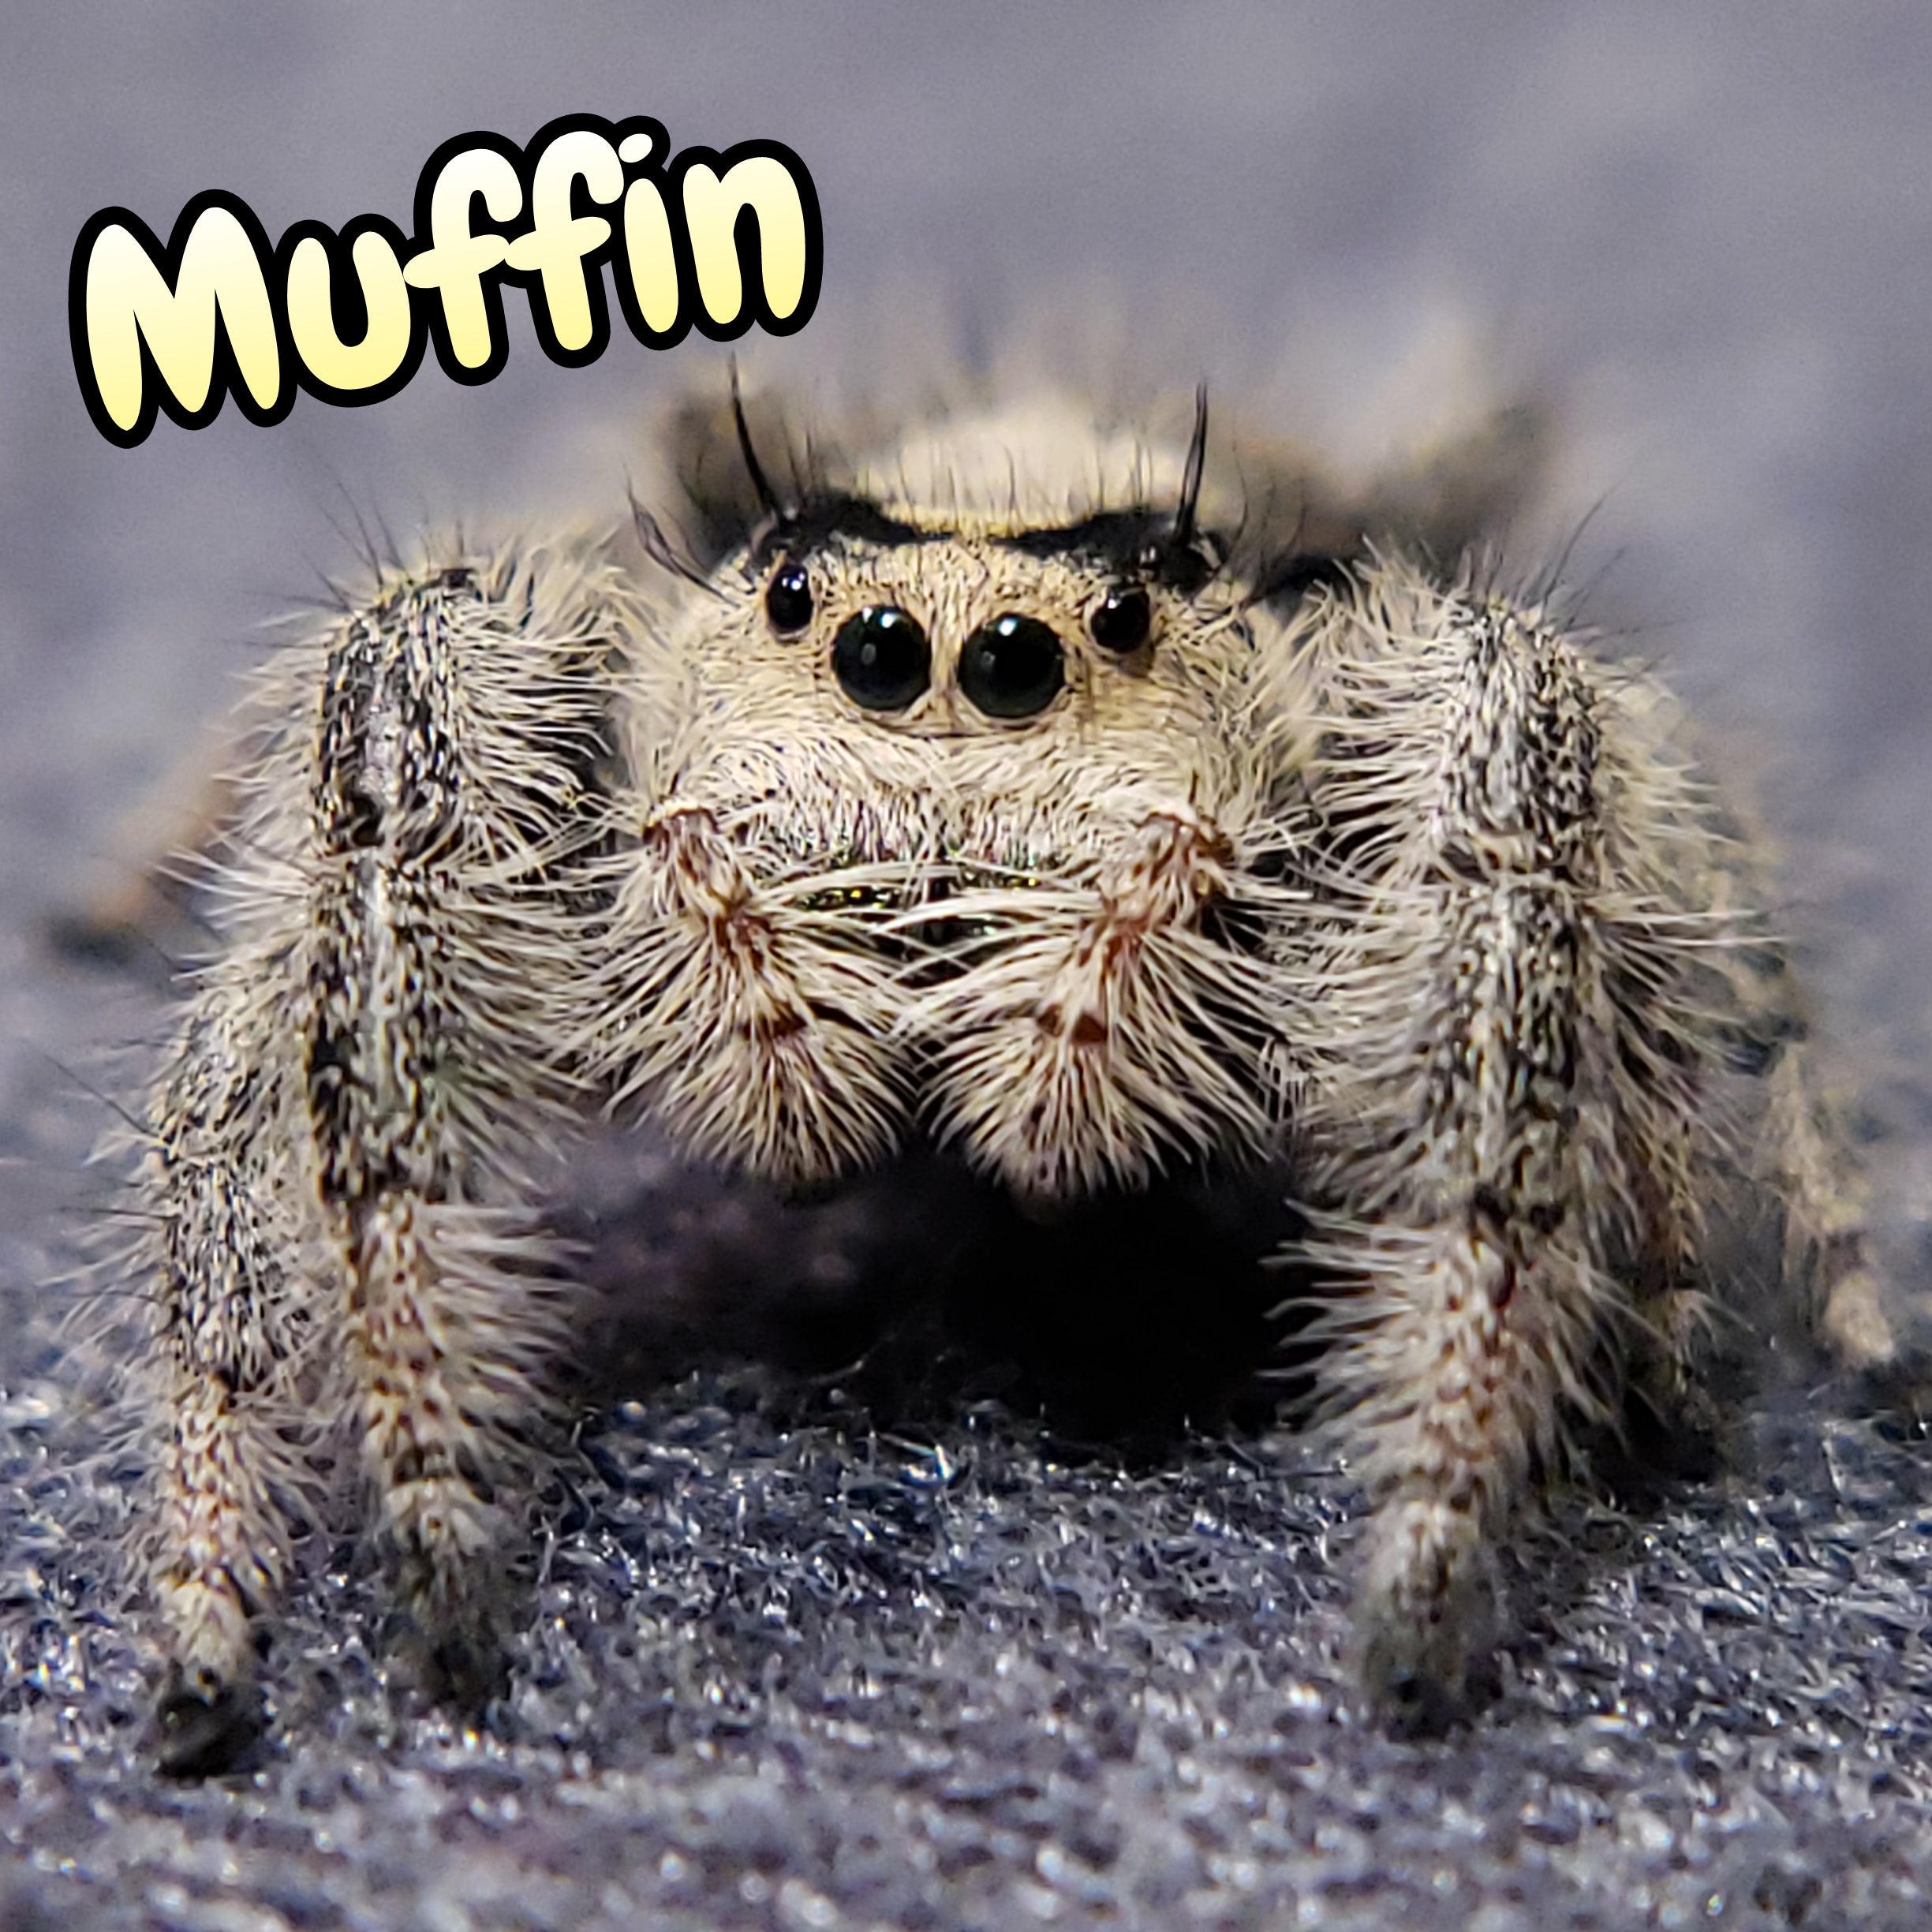 Regal Jumping Spider "Muffin"